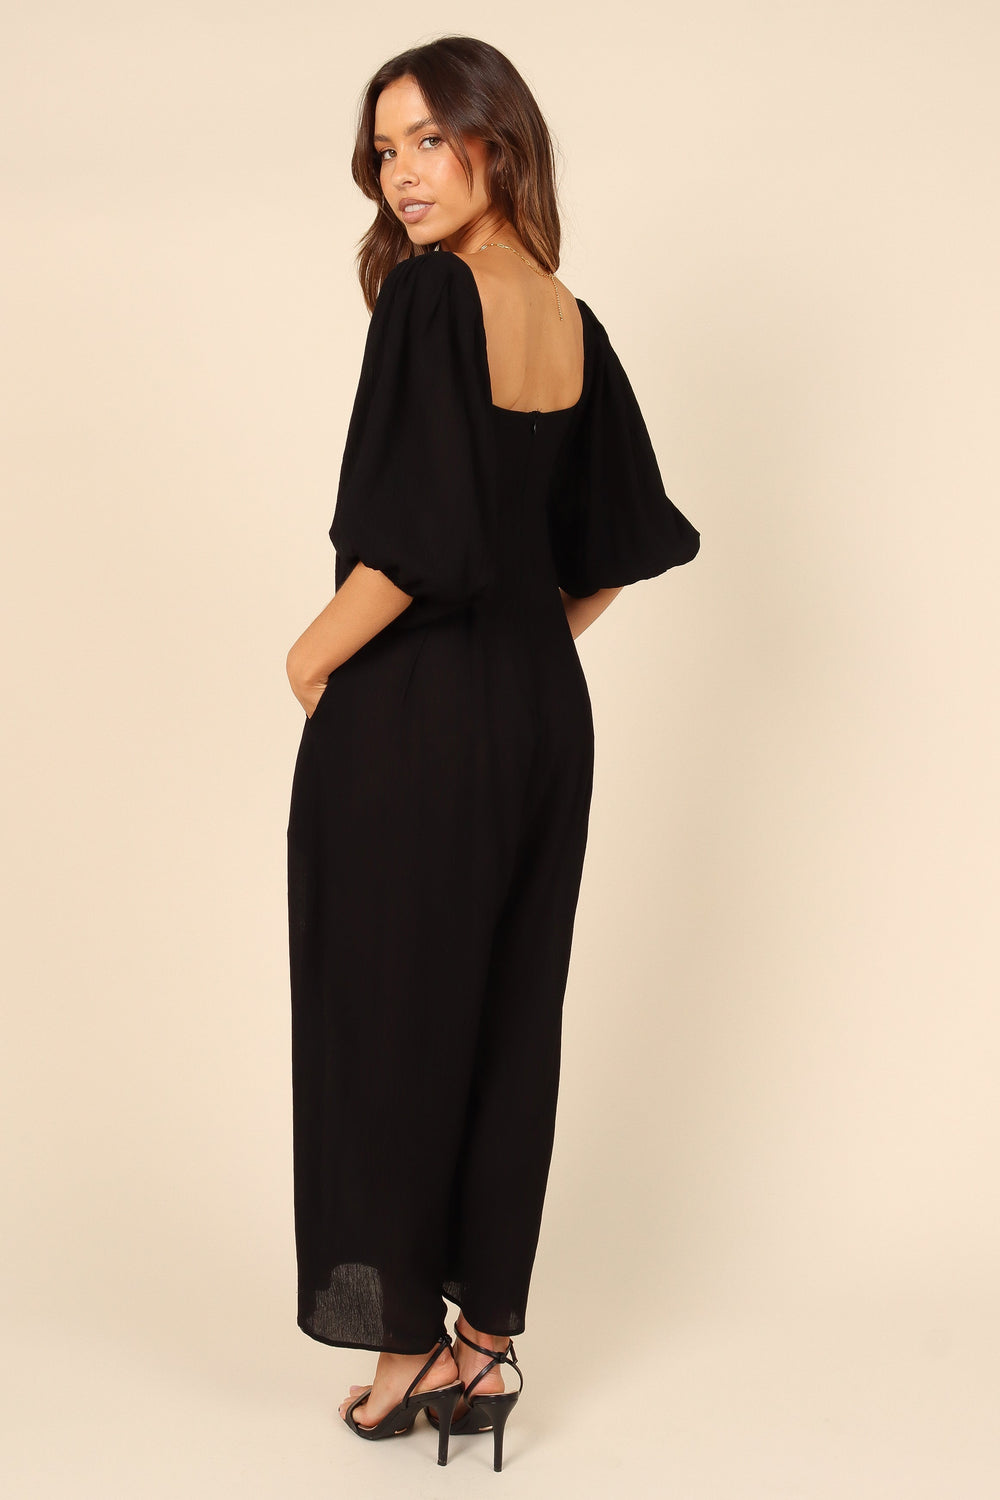 Petal and Pup USA Rompers Suzana Wide Leg Jumpsuit - Black